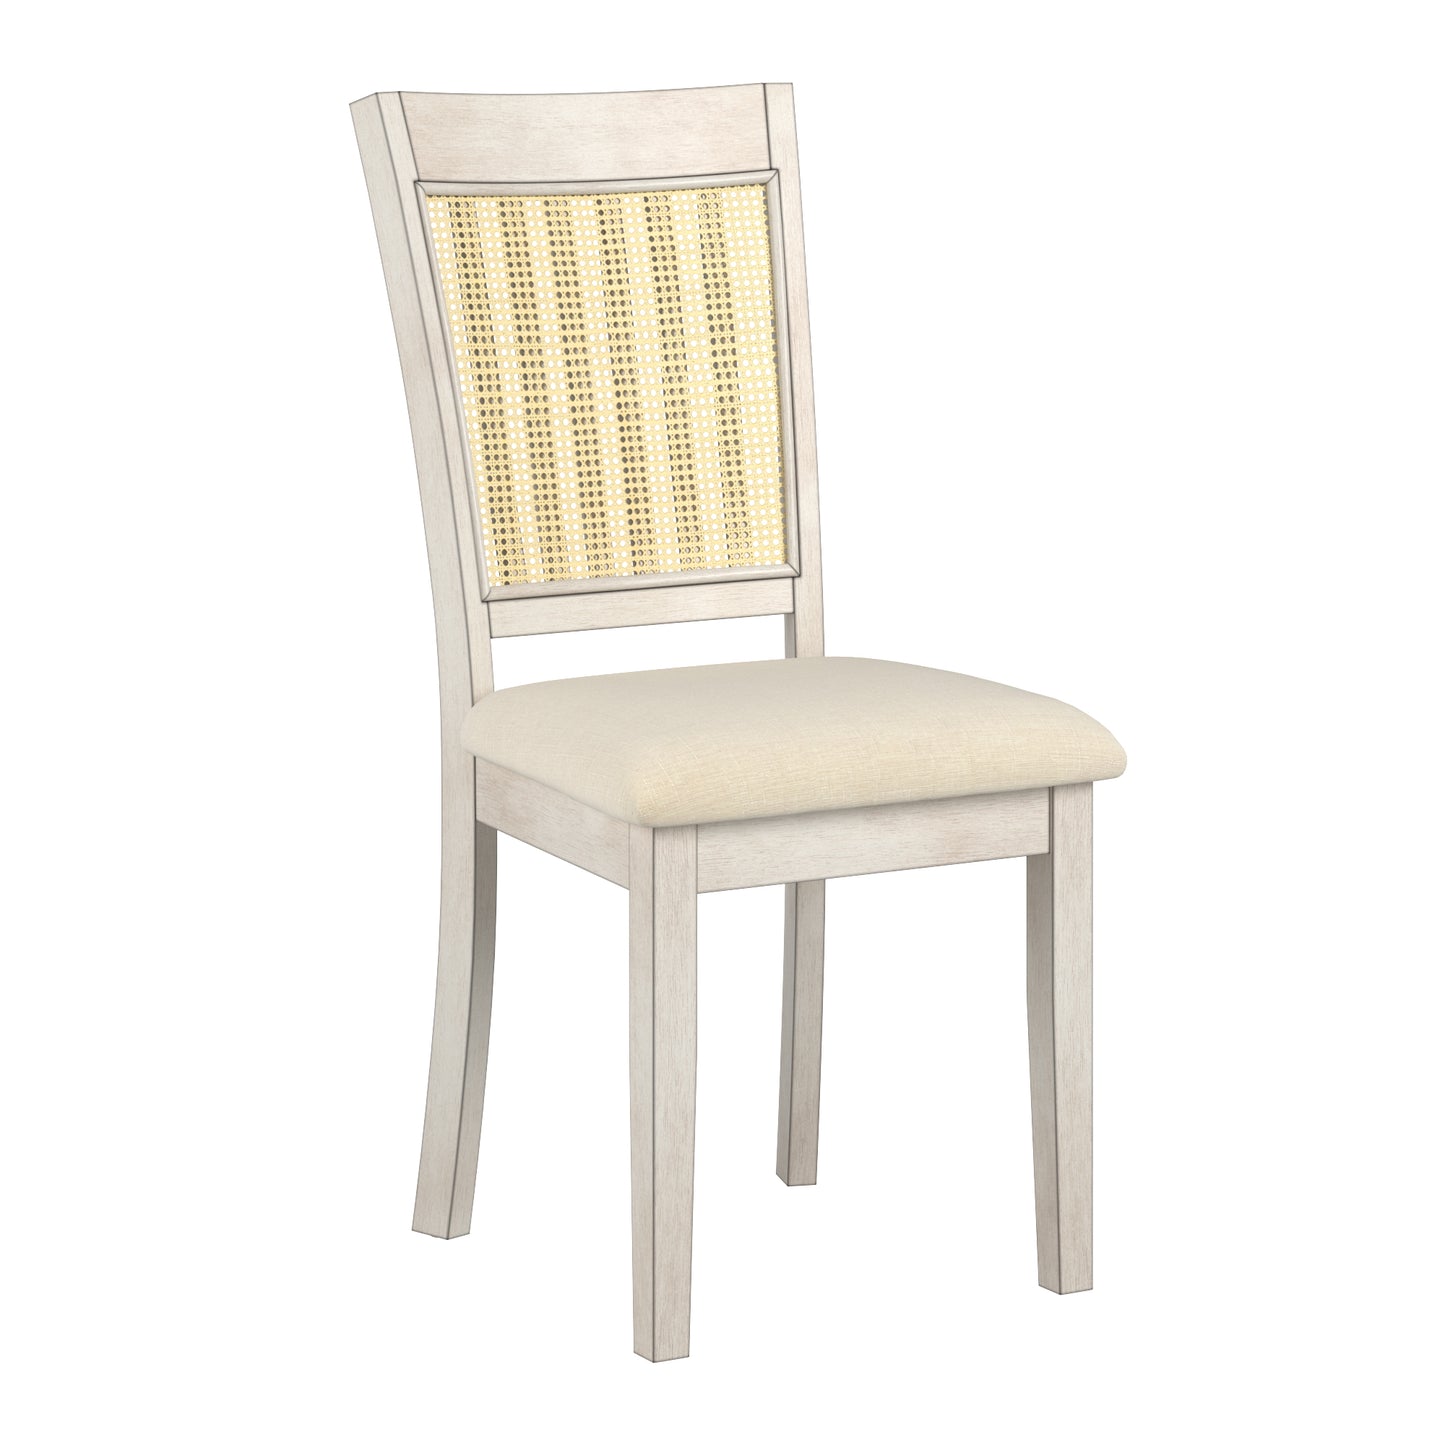 Cane Accent Dining - Slat Back Chair (Set of 2), Antique White Finish, Beige Linen